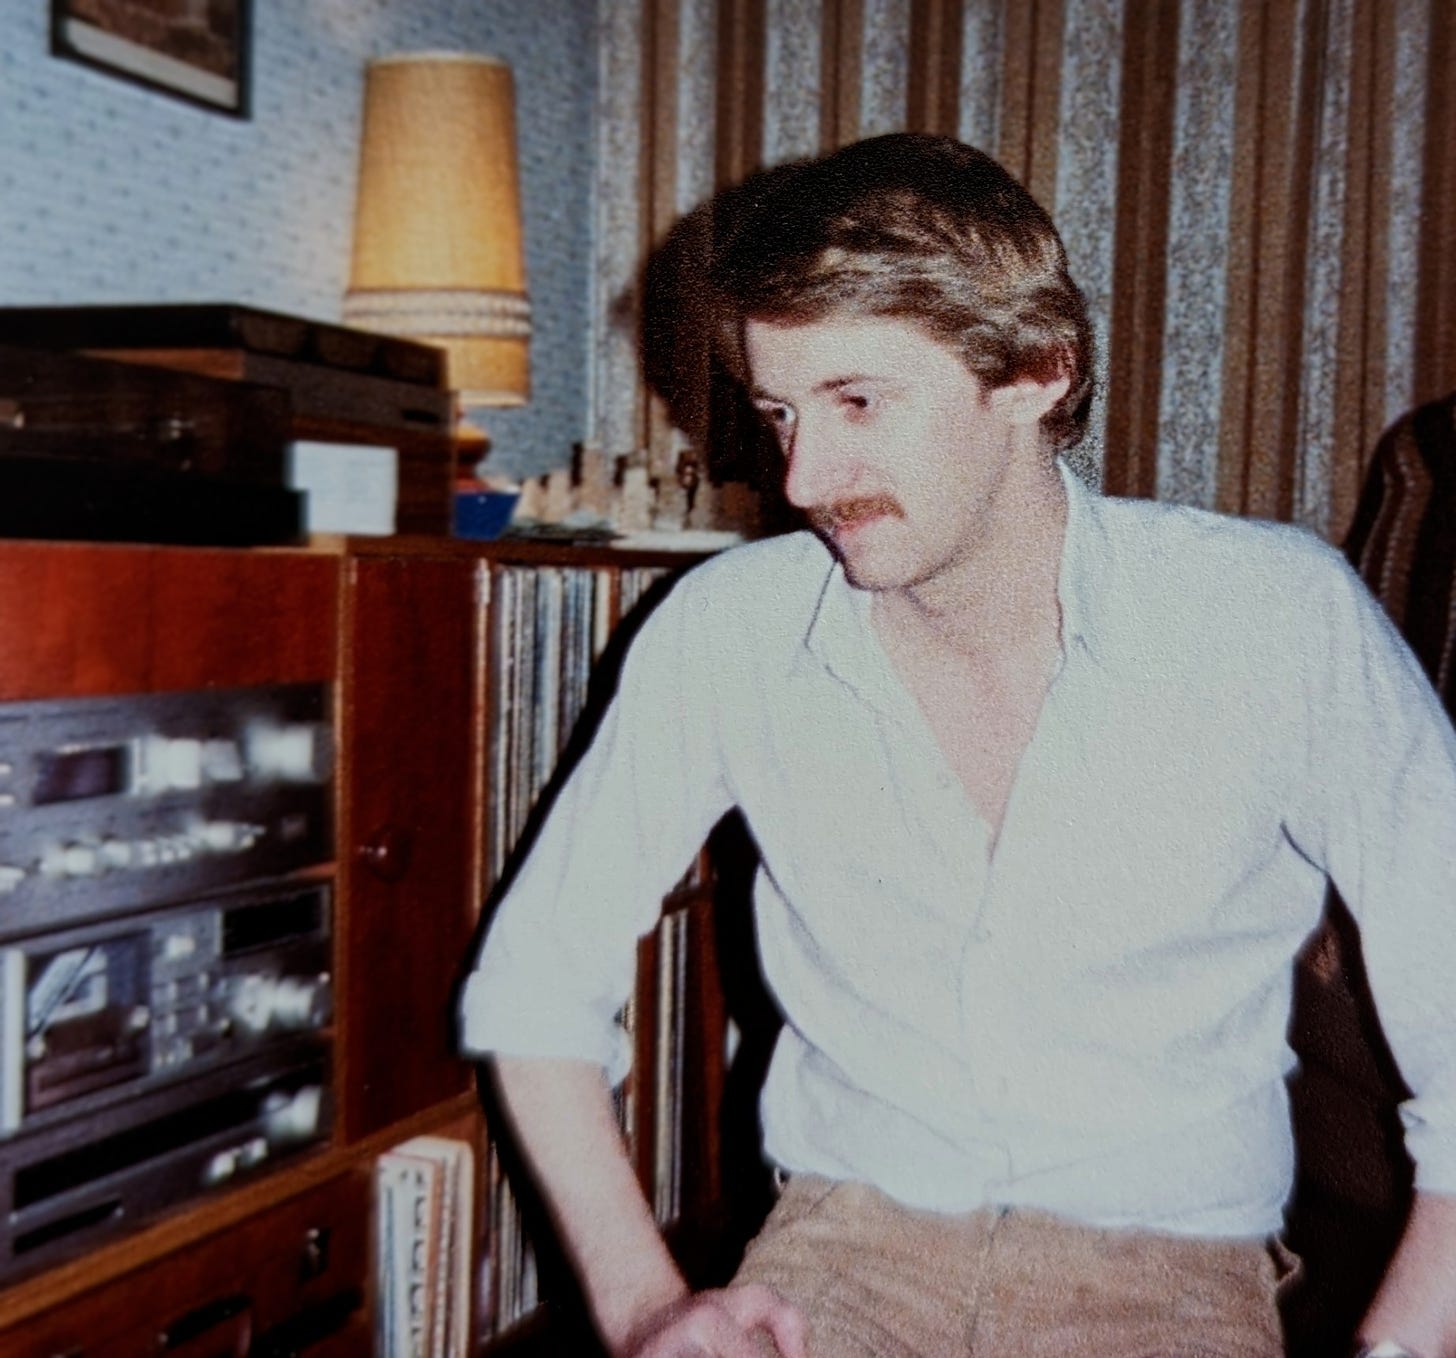 A young man with blonde hair and a moustache sits on the floor next to his beloved Cyrus hi-fi, LPs stacked on shelves. He is gazing to the side.